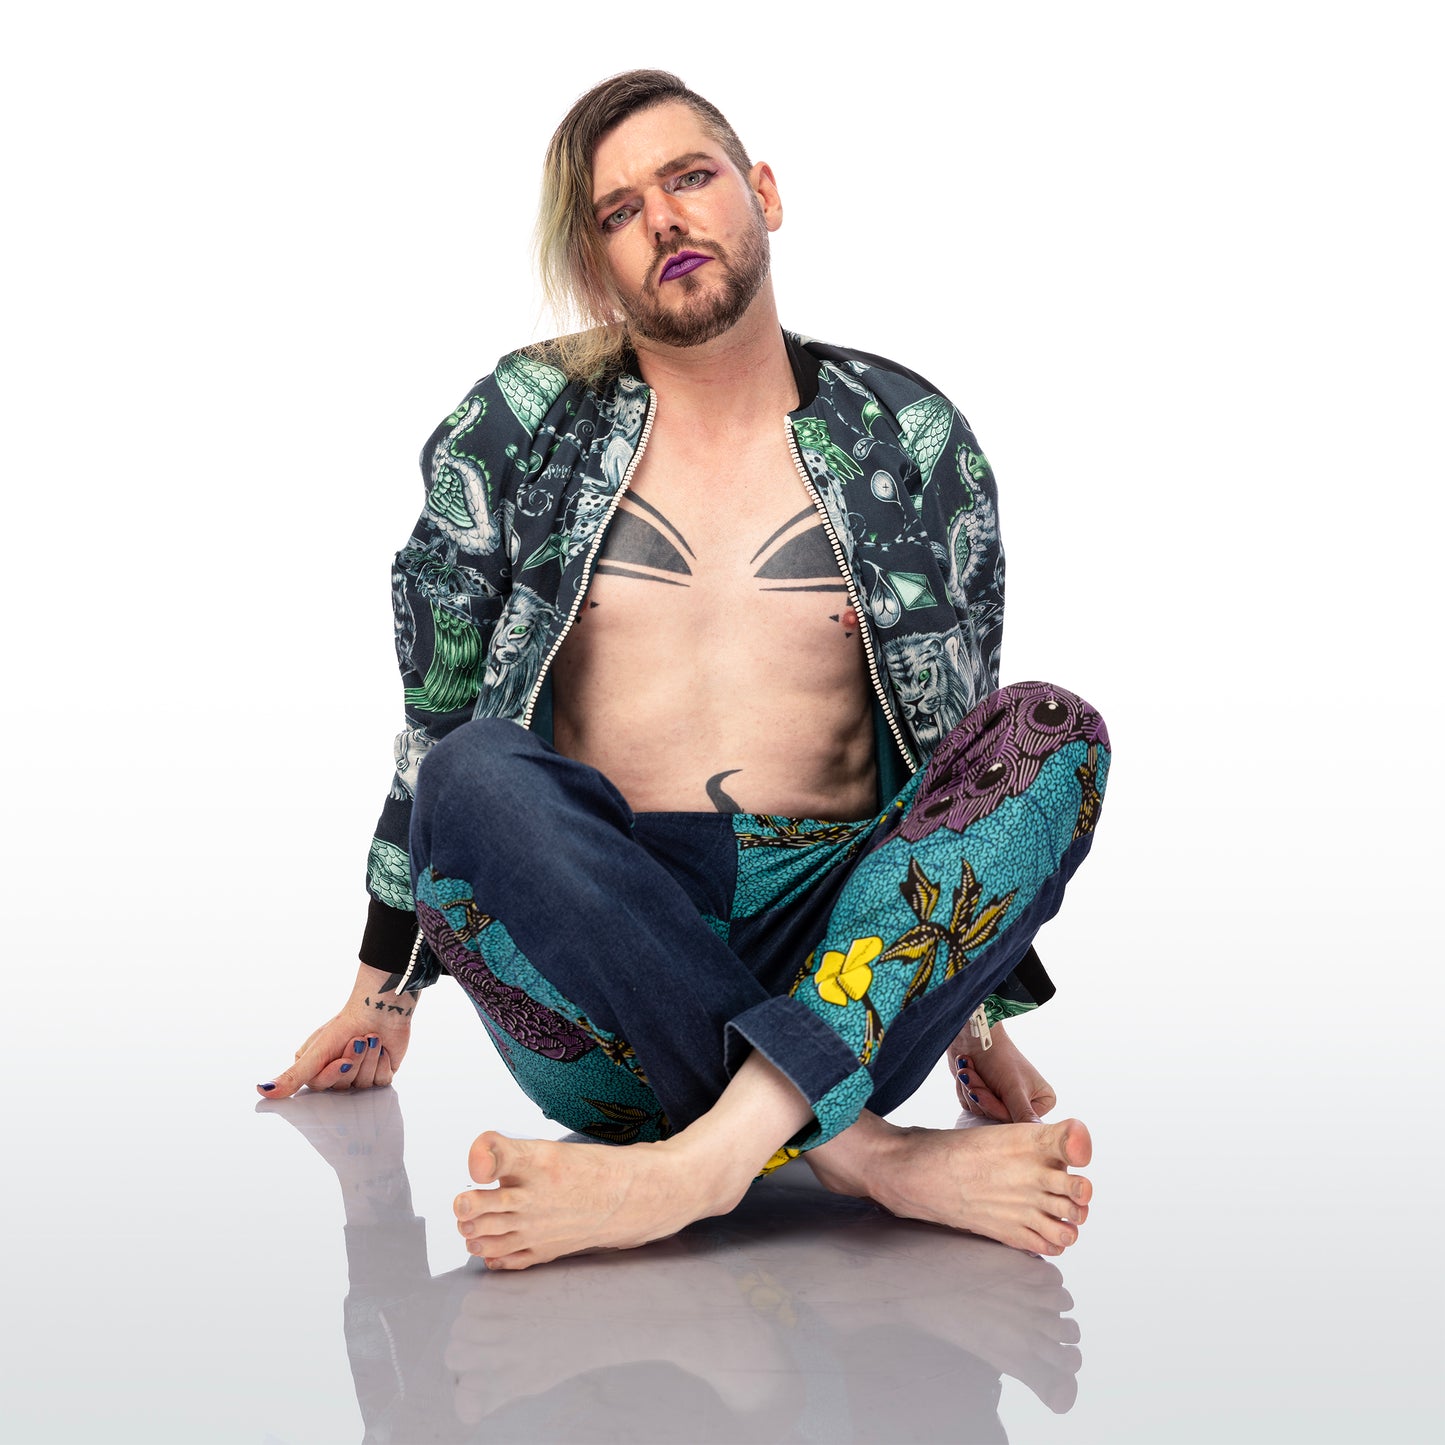 Extinct Bomber Jacket, a handmade-to-order piece made from cotton satin fabric printed with a blue and green sketched design of lions, dodos and monkeys with skeletons showing. This zip up bomber jacket has raglan sleeves, front welt pockets and ribbed collar, cuffs and waistband. Model Max sits on the floor with legs crossed in front of them. 